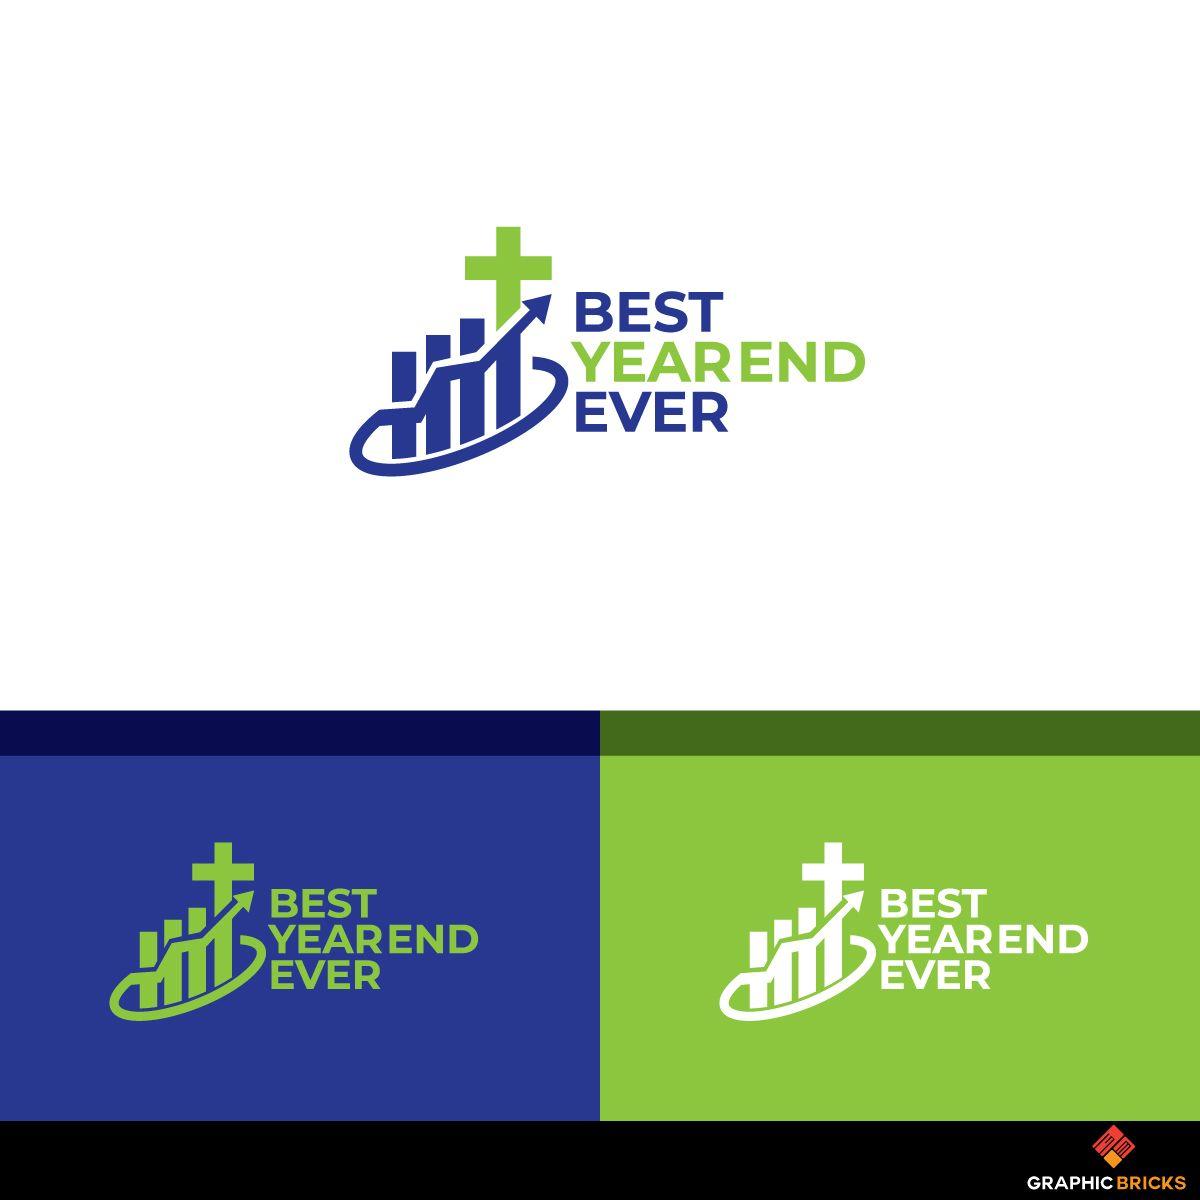 Best Ever Company Logo - Logo Design for Best Year End Ever by Graphic Bricks | Design #19015487